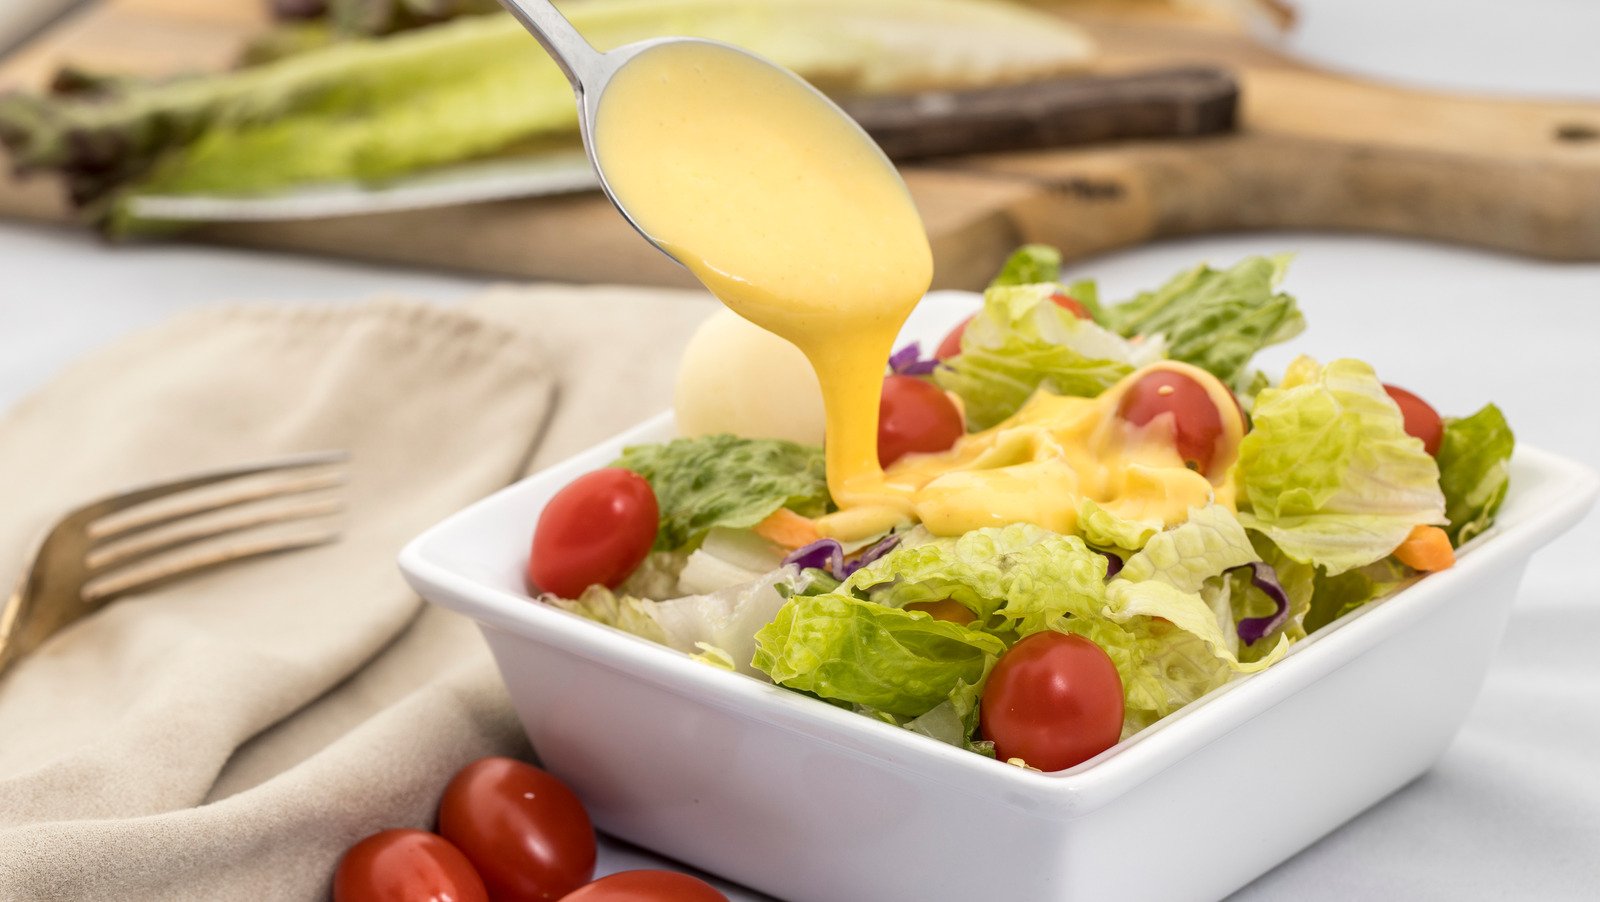 Is It Really Safe To Store Salad Dressing In The Refrigerator Door?